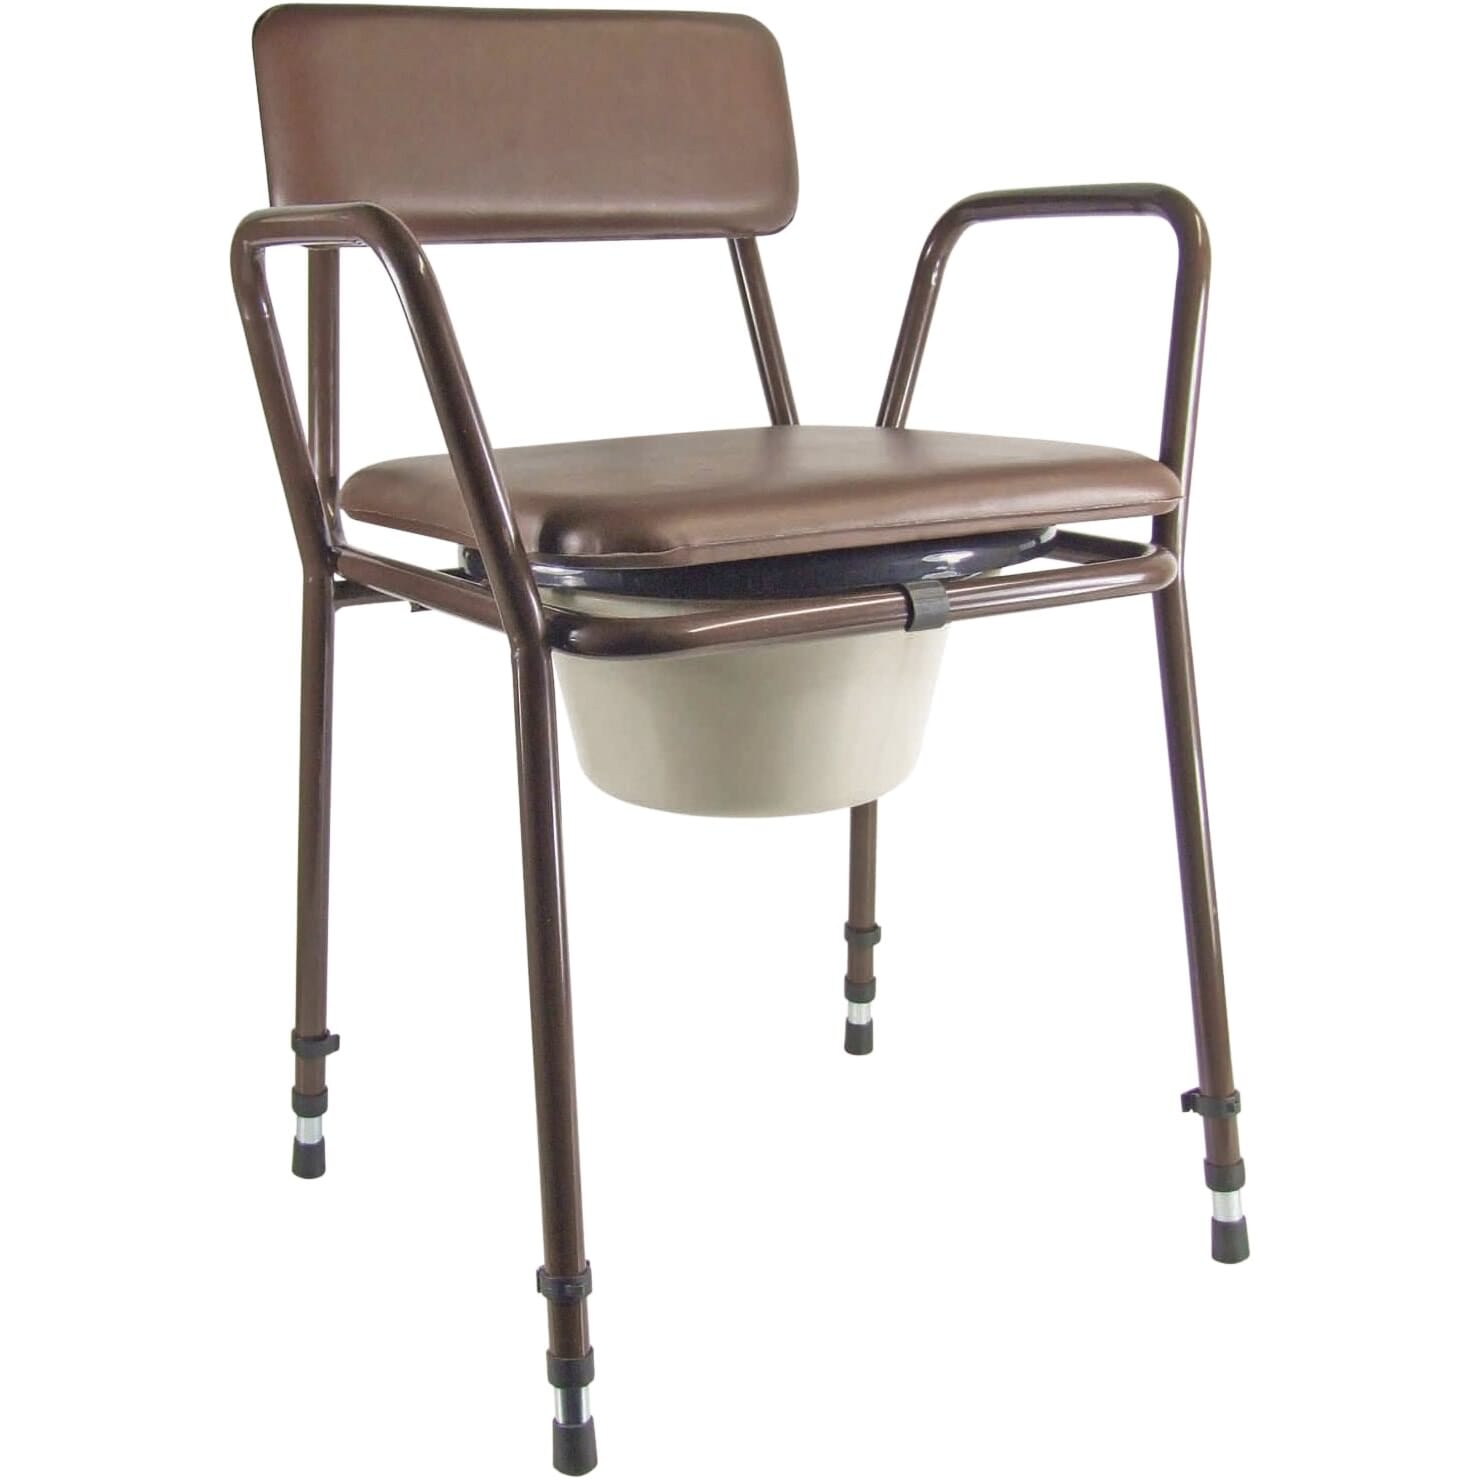 View Stacking Commode Adjustable Height information